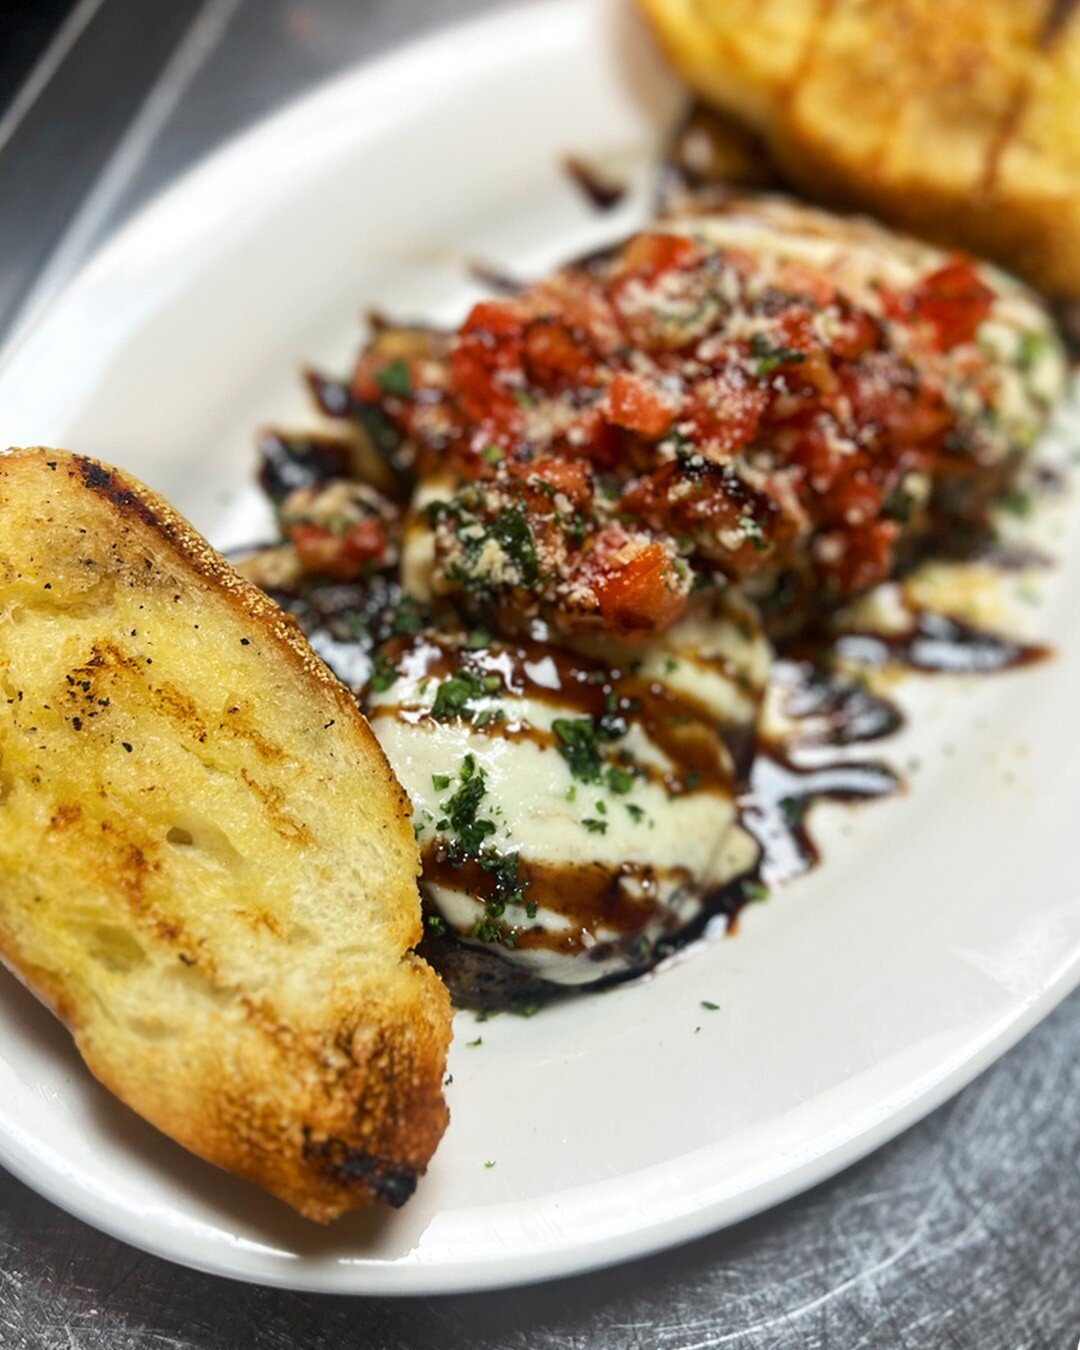 Good food, good mood! Join us this weekend and enjoy our dinner special 🤩

Bruschetta Chicken 
Marinated Springer Mountain Chicken Breast Grilled and Topped with Melted Fresh Mozzarella and Bruschetta served with Grilled Zucchini and a Grilled Bague